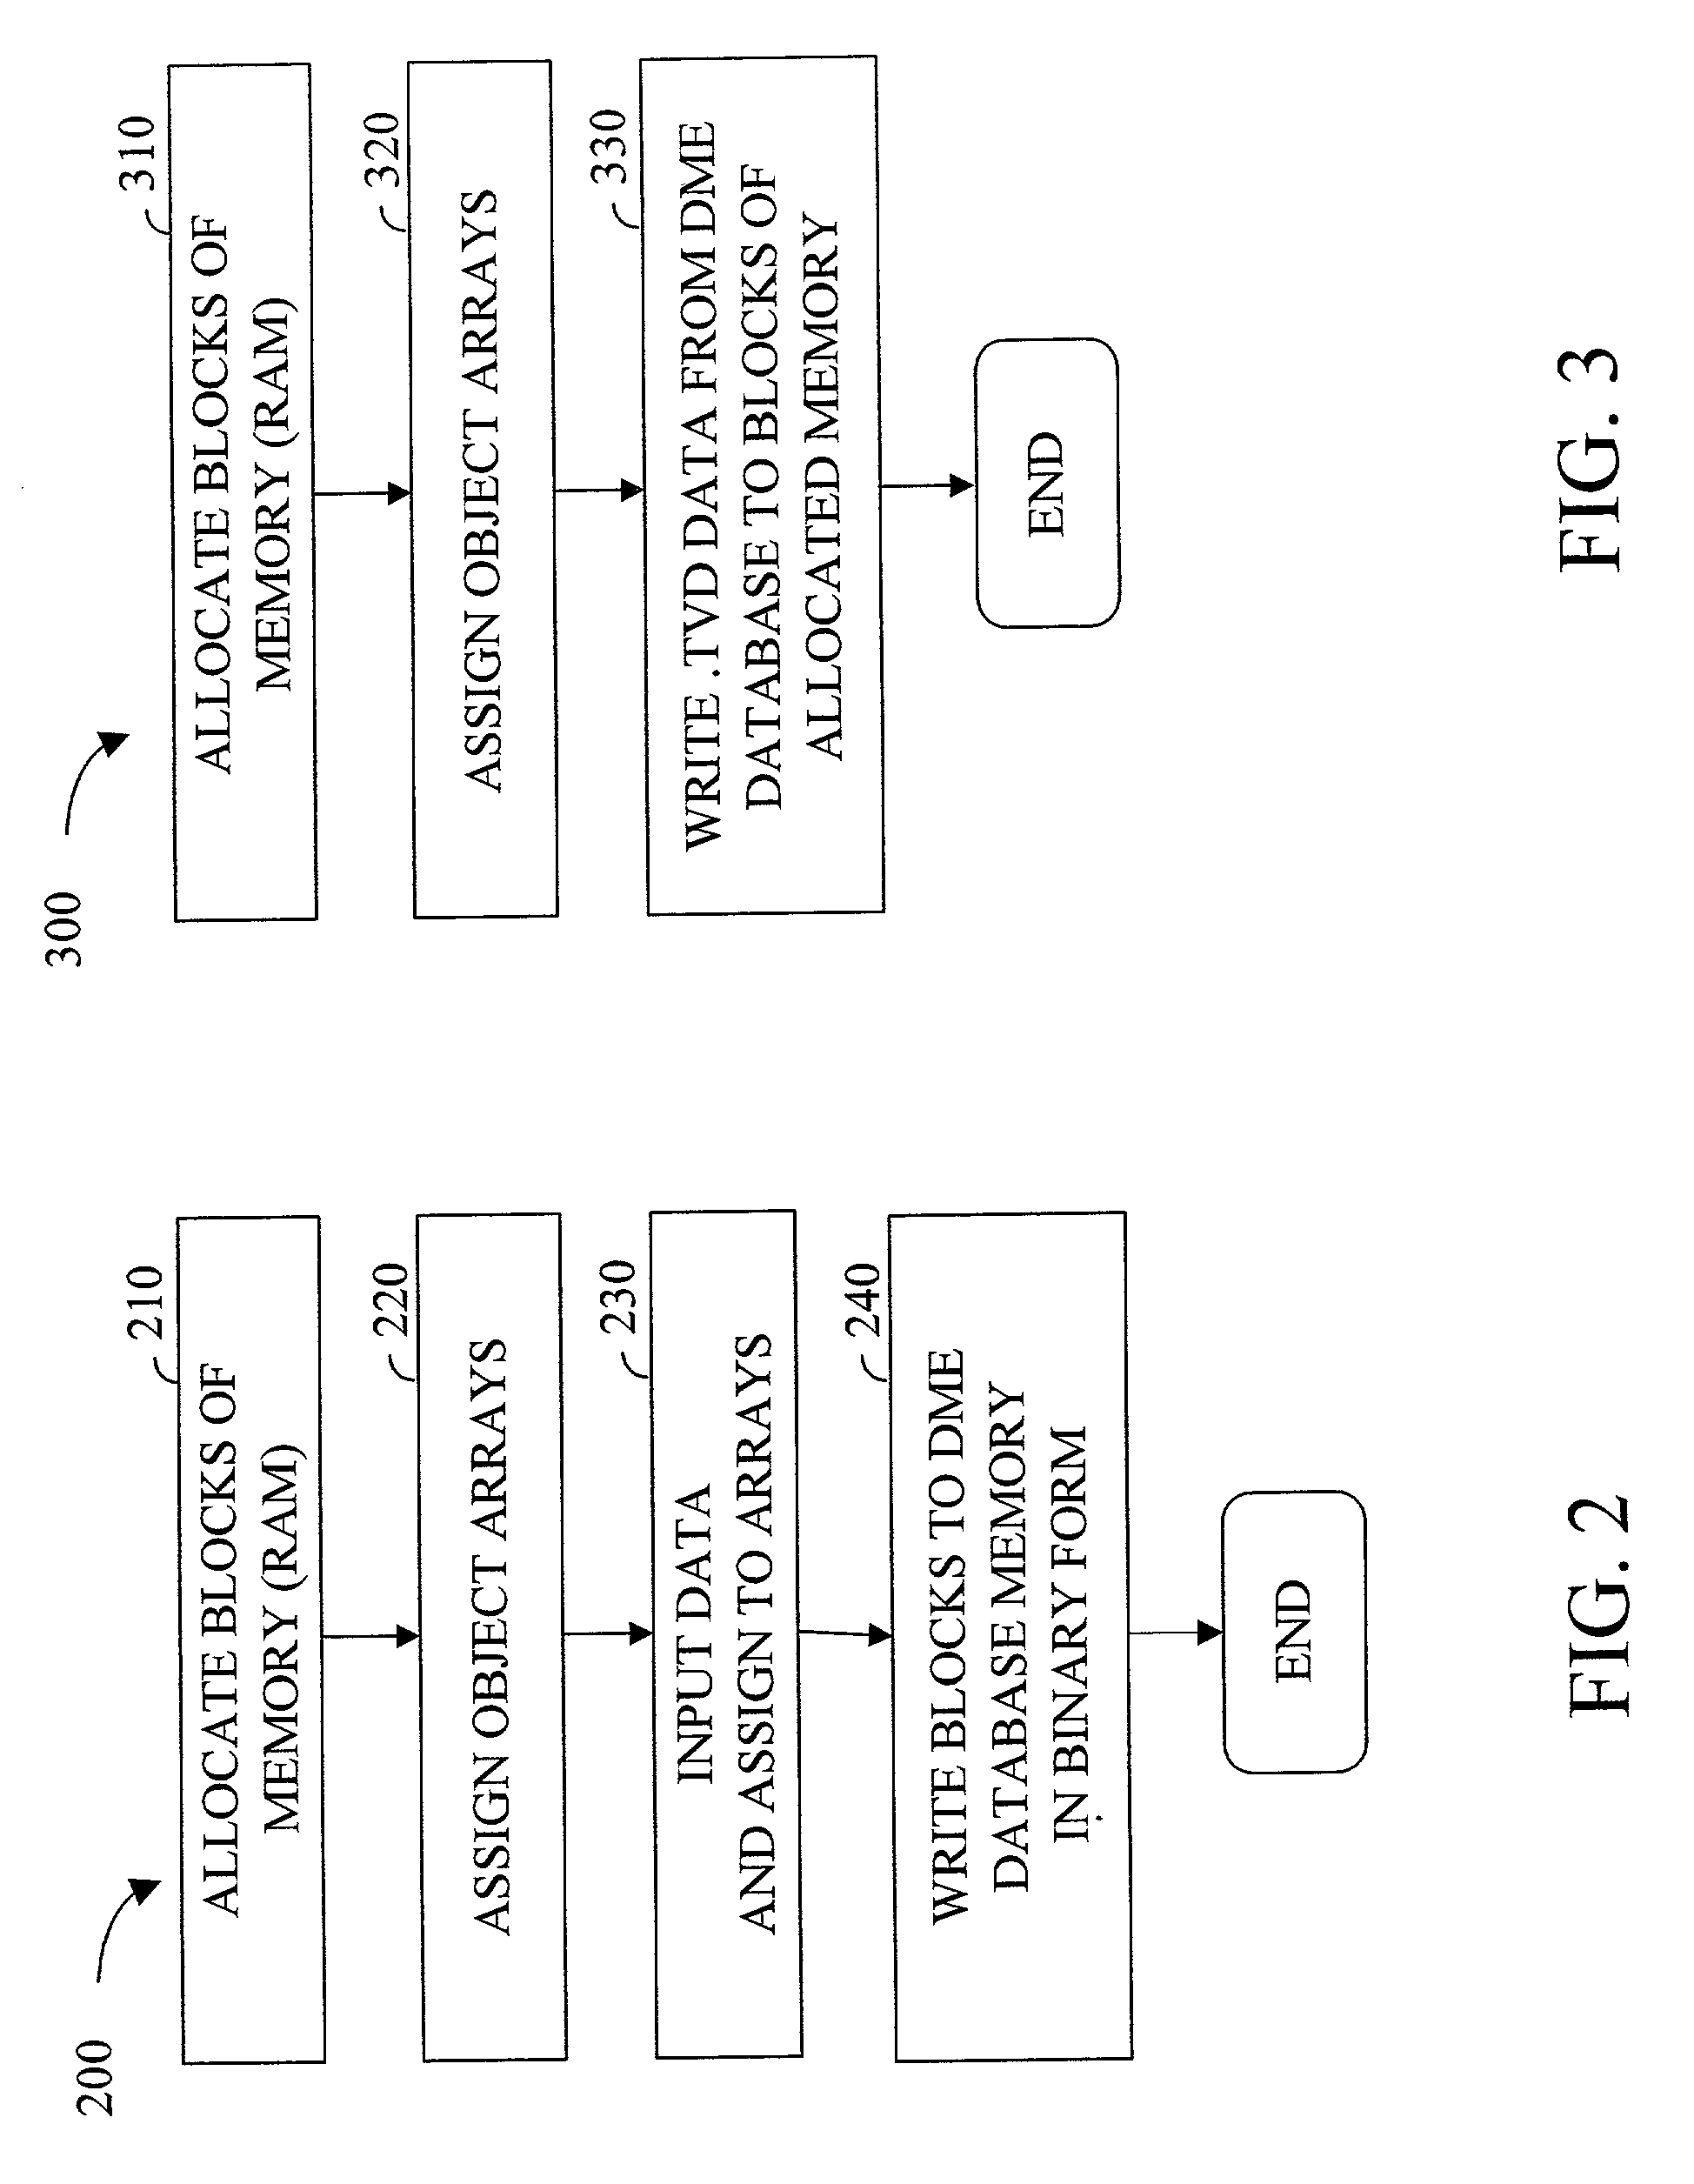 Method and apparatus for analyzing data and advertising optimization